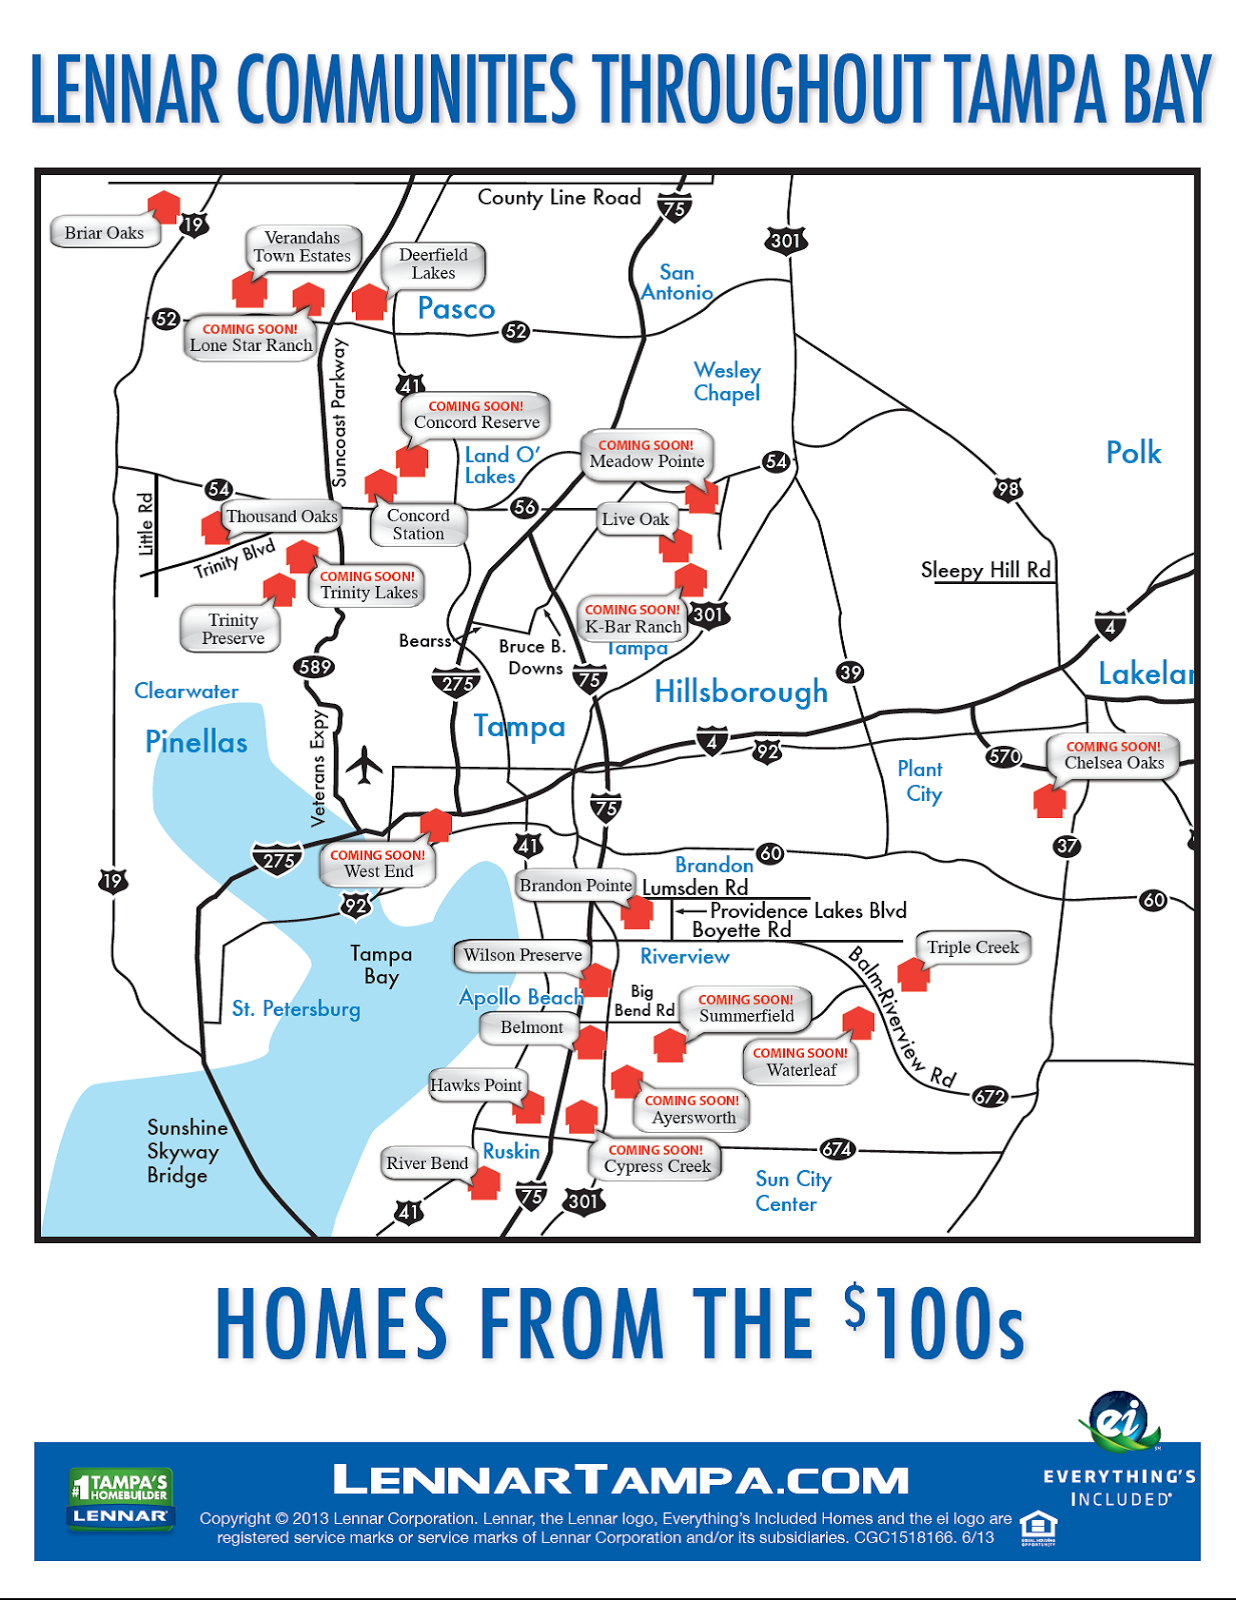 earn-2-back-newest-communities-from-lennar-in-the-tampa-bay-area